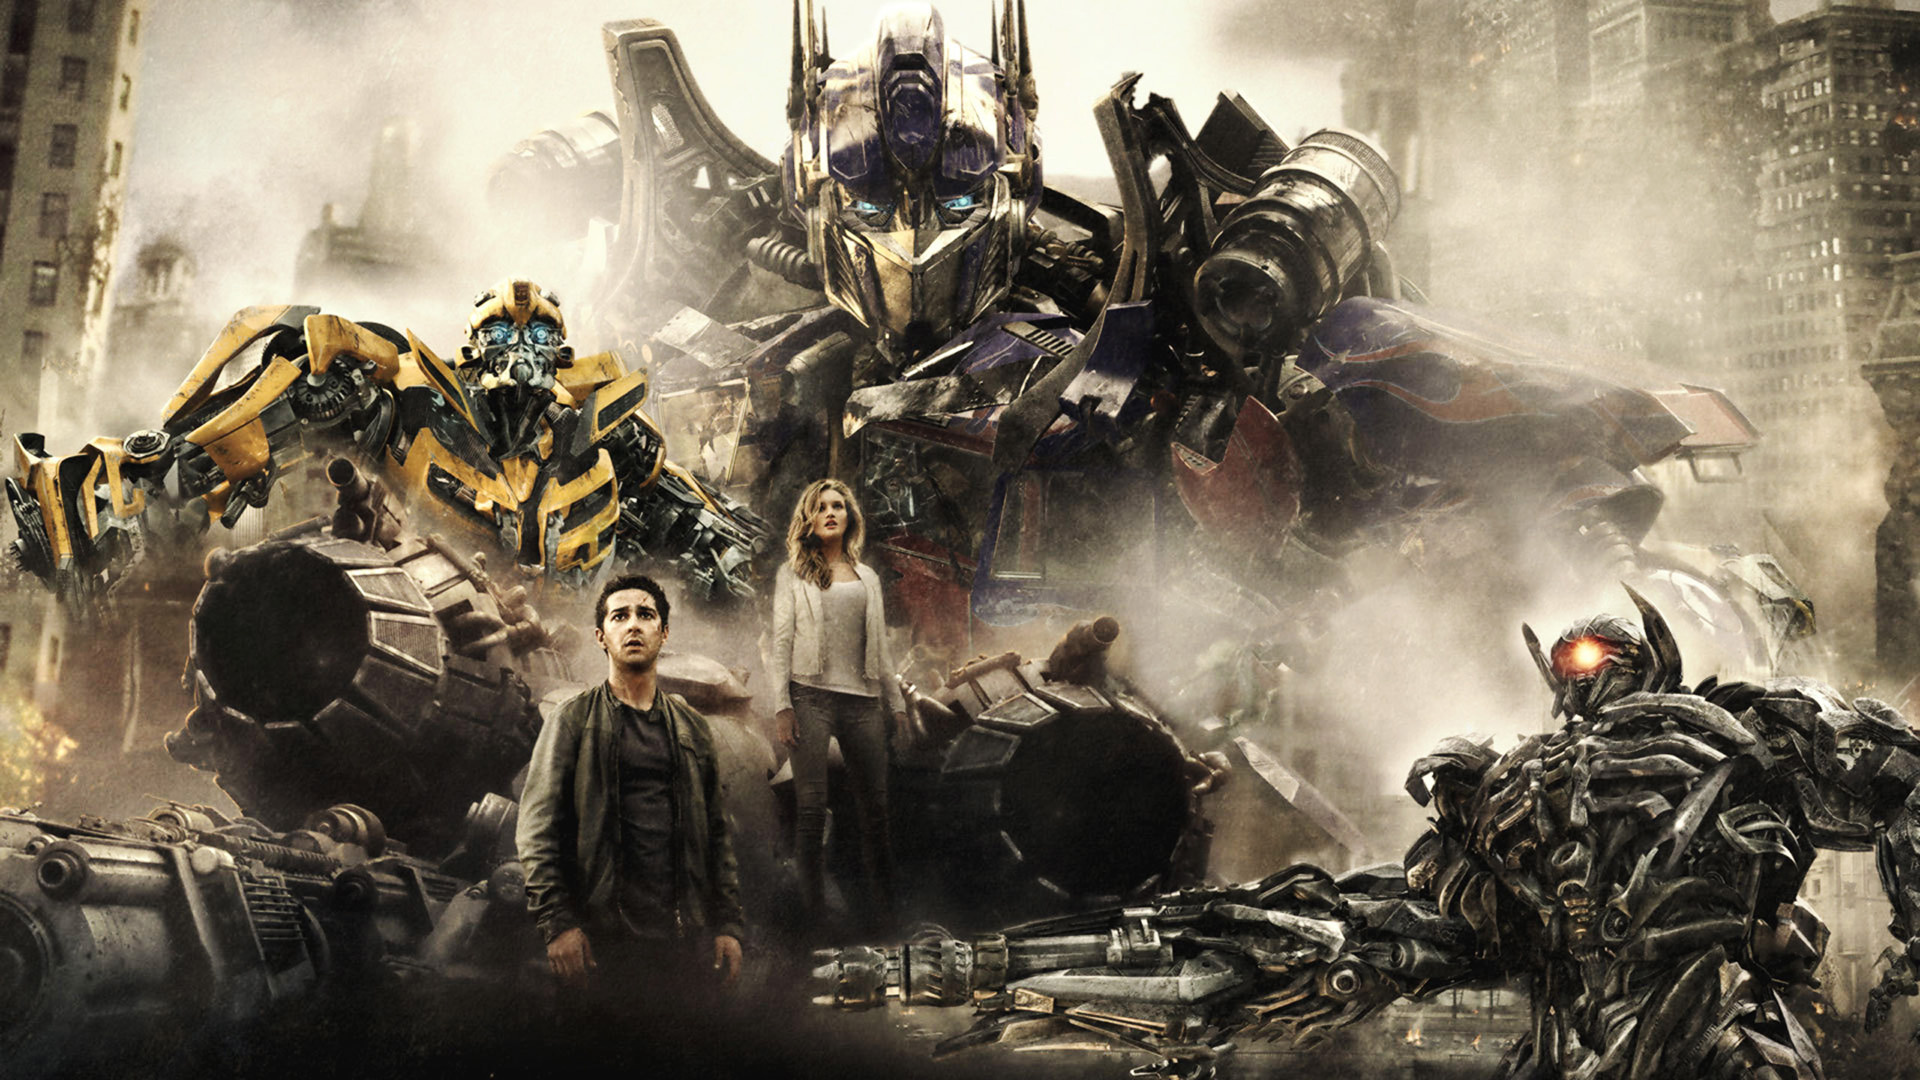 Sam Witwicky, Transformers 3, Dark of the Moon, Geeks review, 1920x1080 Full HD Desktop